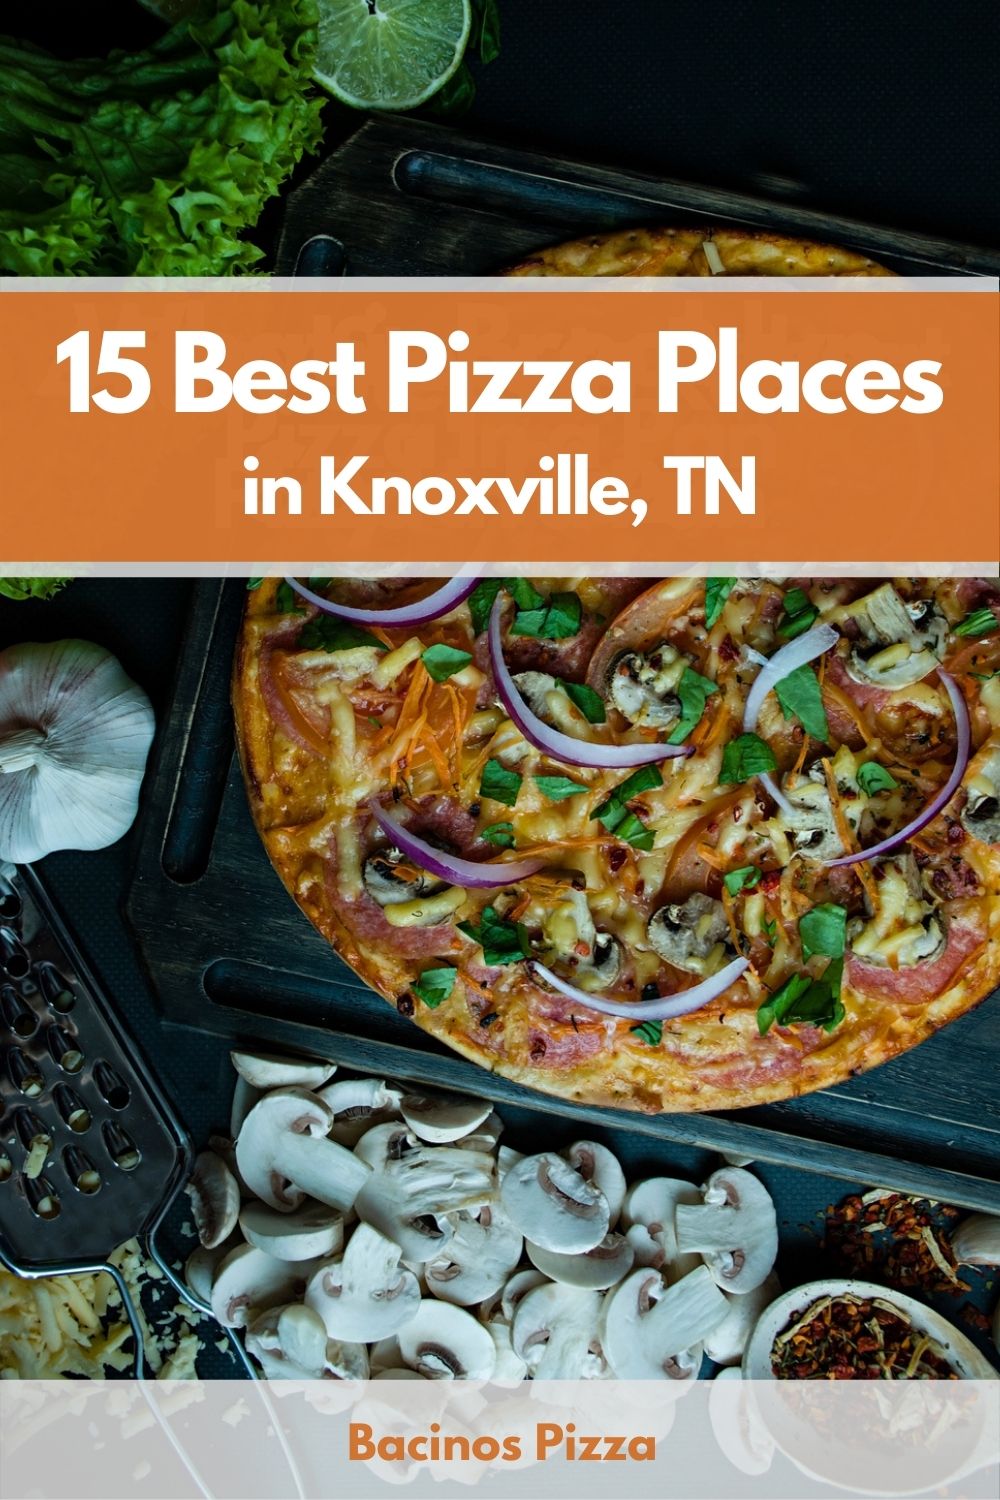 15 Best Pizza Places in Knoxville, TN pin